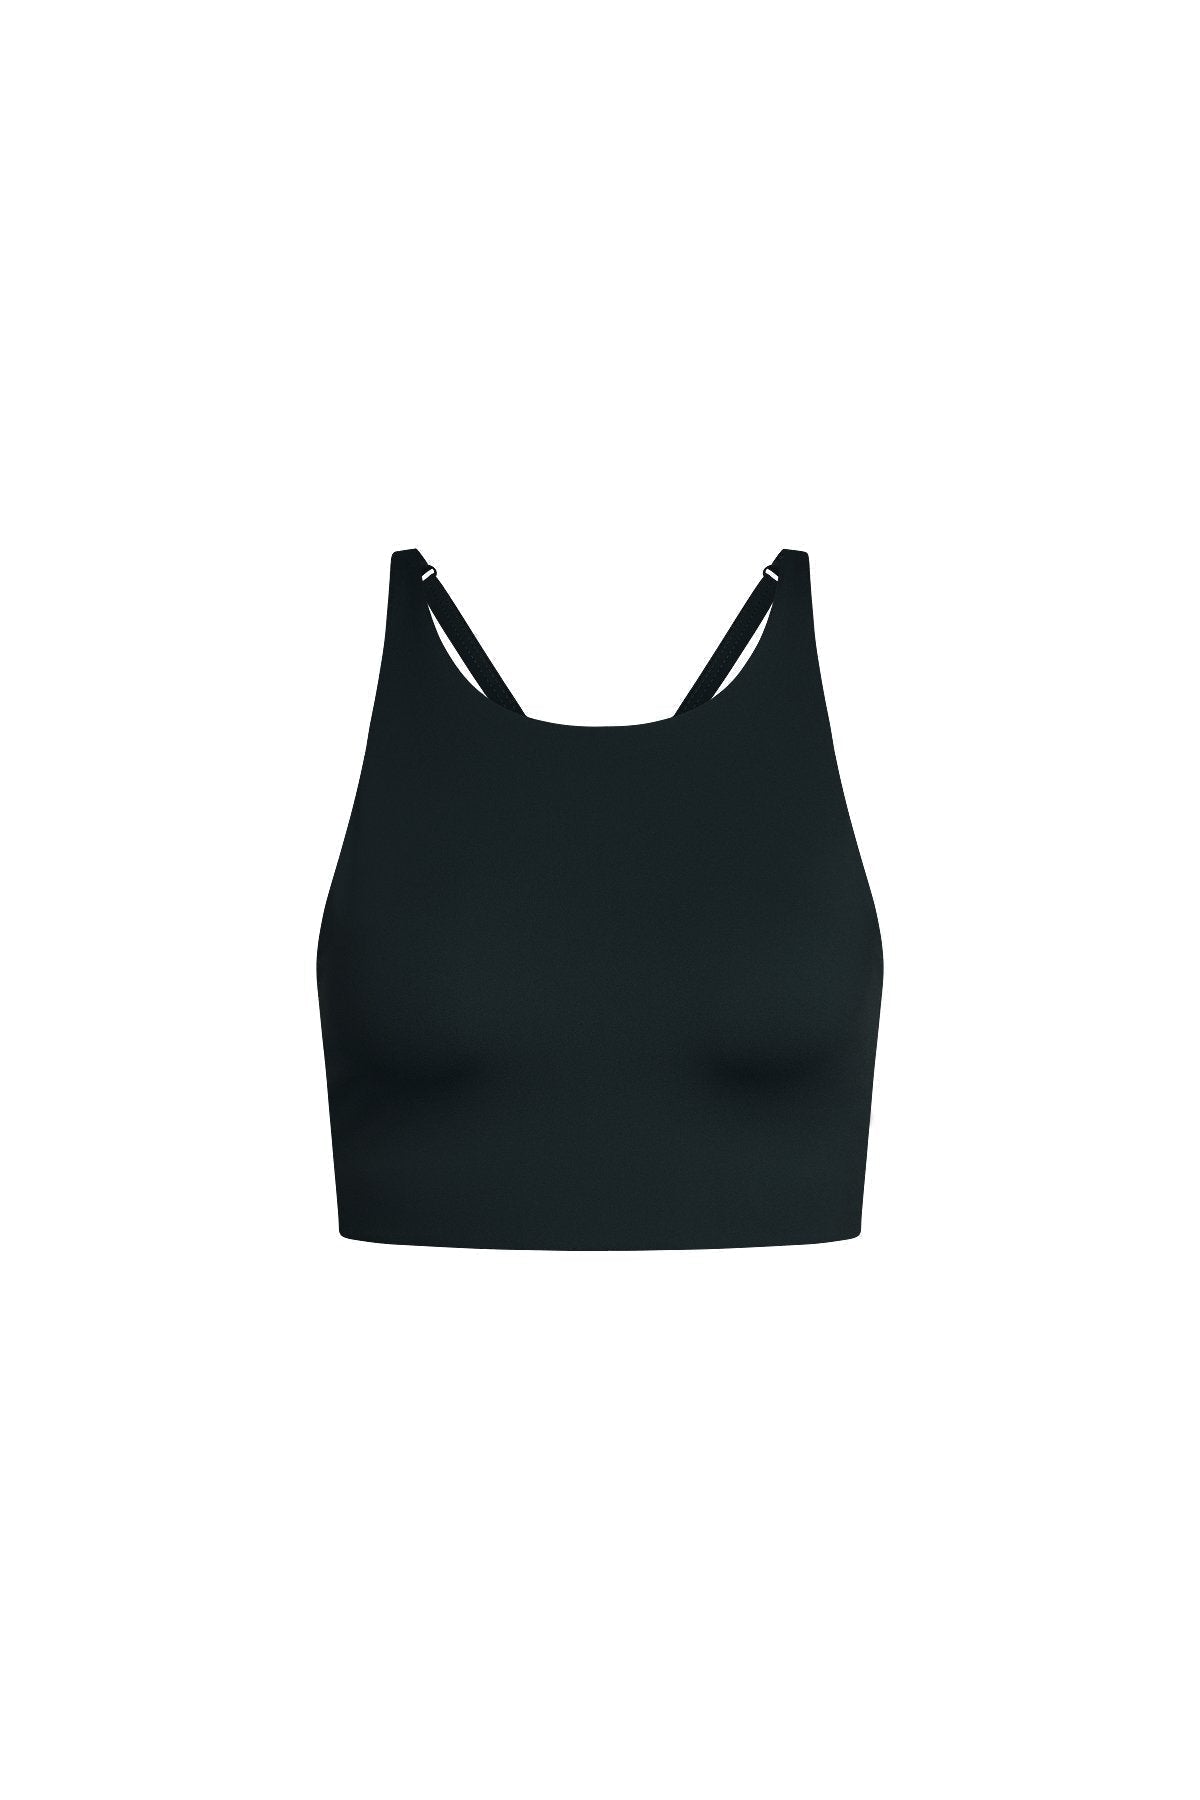 Girlfriend Collective Topanga Bra In Black-Womens-Ohh! By Gum - Shop Sustainable